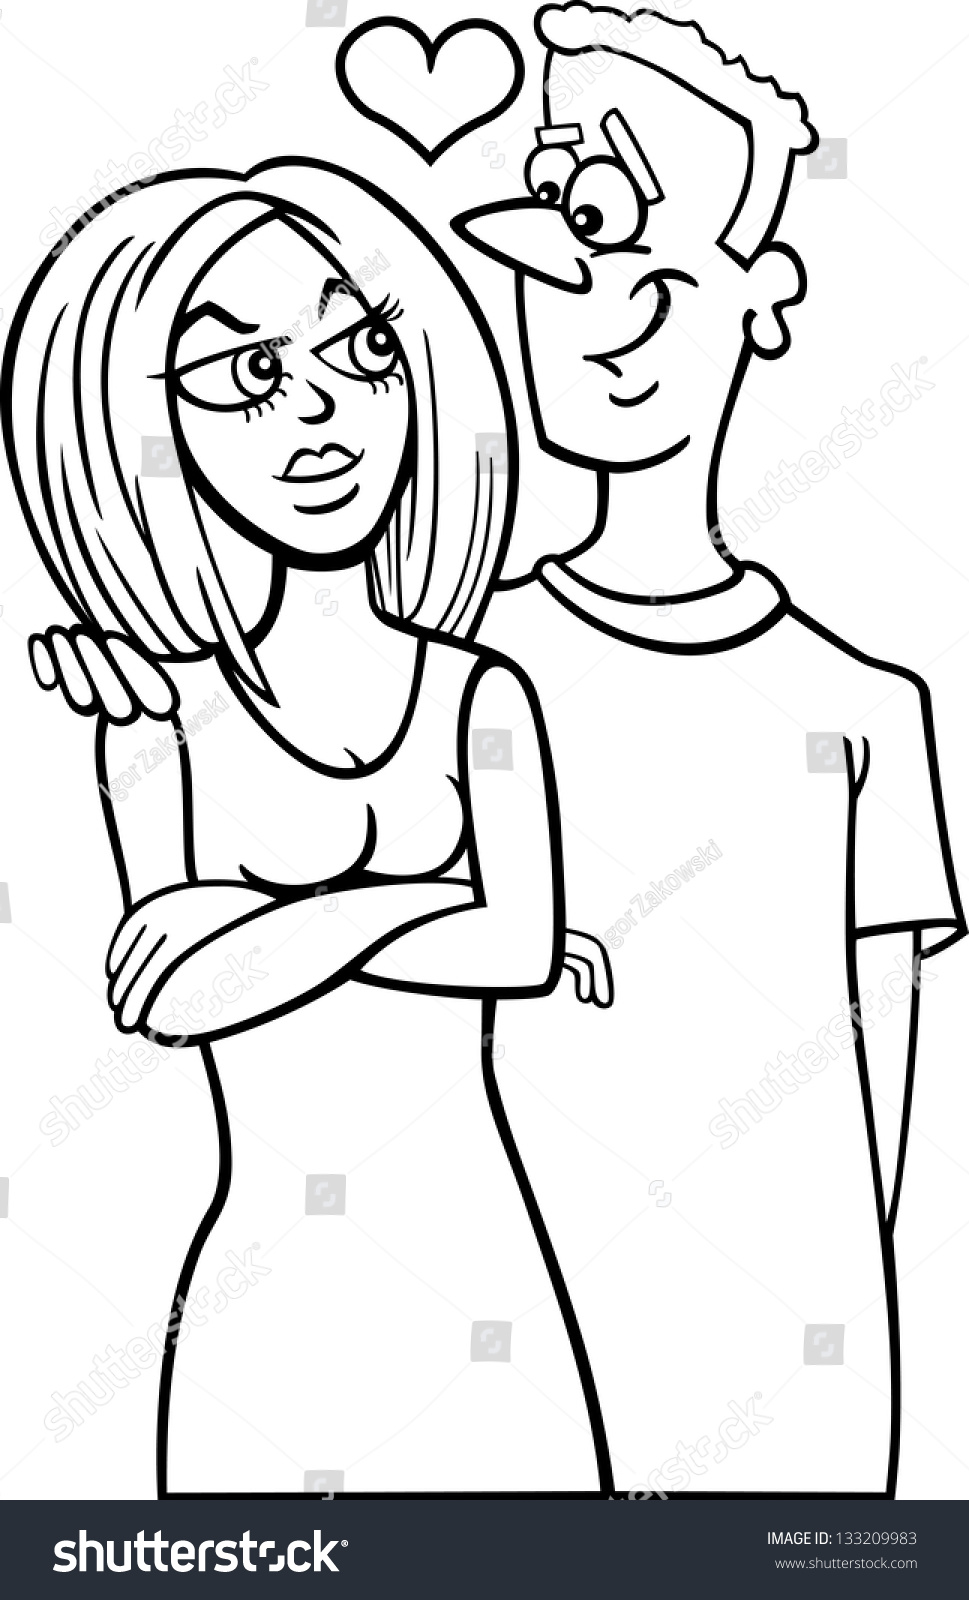 Black And White Cartoon Vector Illustration Of Man And Woman Couple In